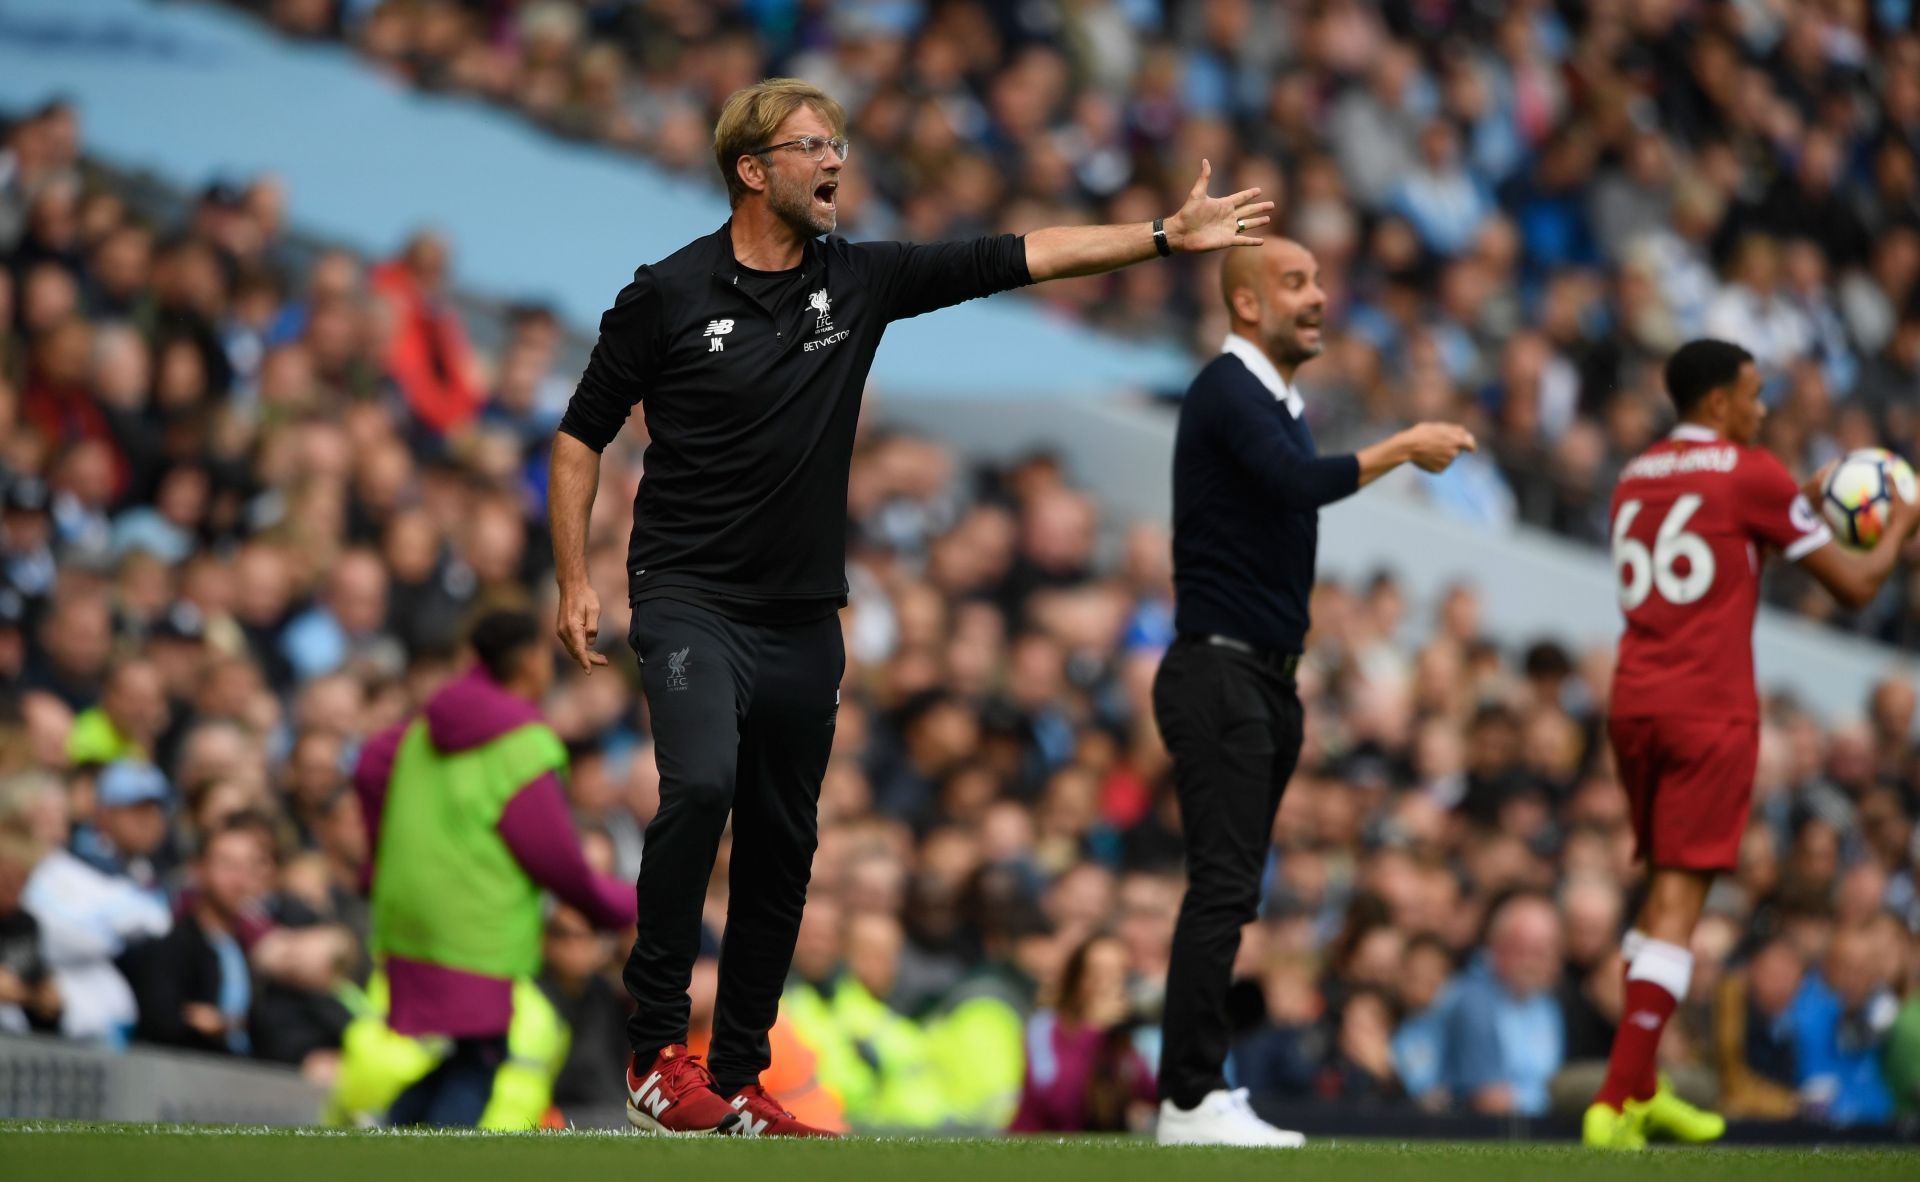 The Reds and the Cityzens are in the midst of an intense battle for the Premier League title